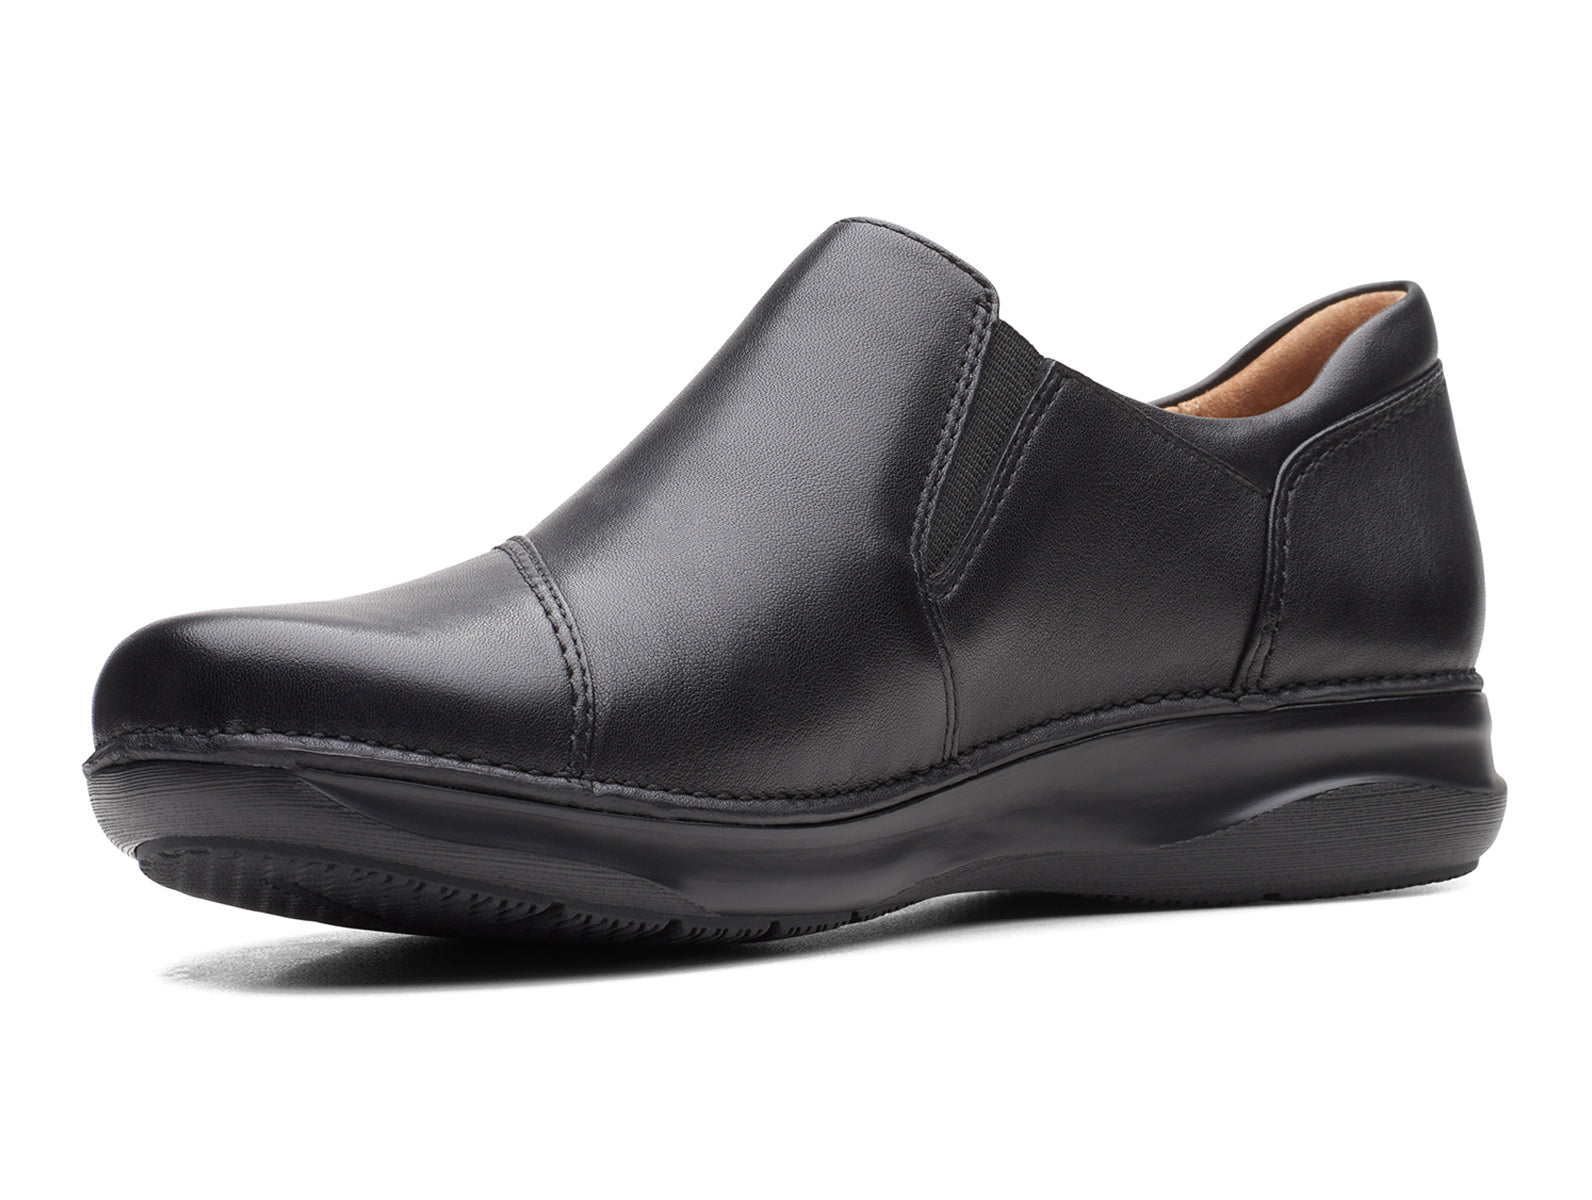 Clarks Appley Zip | Black Leather | Ladies Shoes at Walsh Brothers Shoes